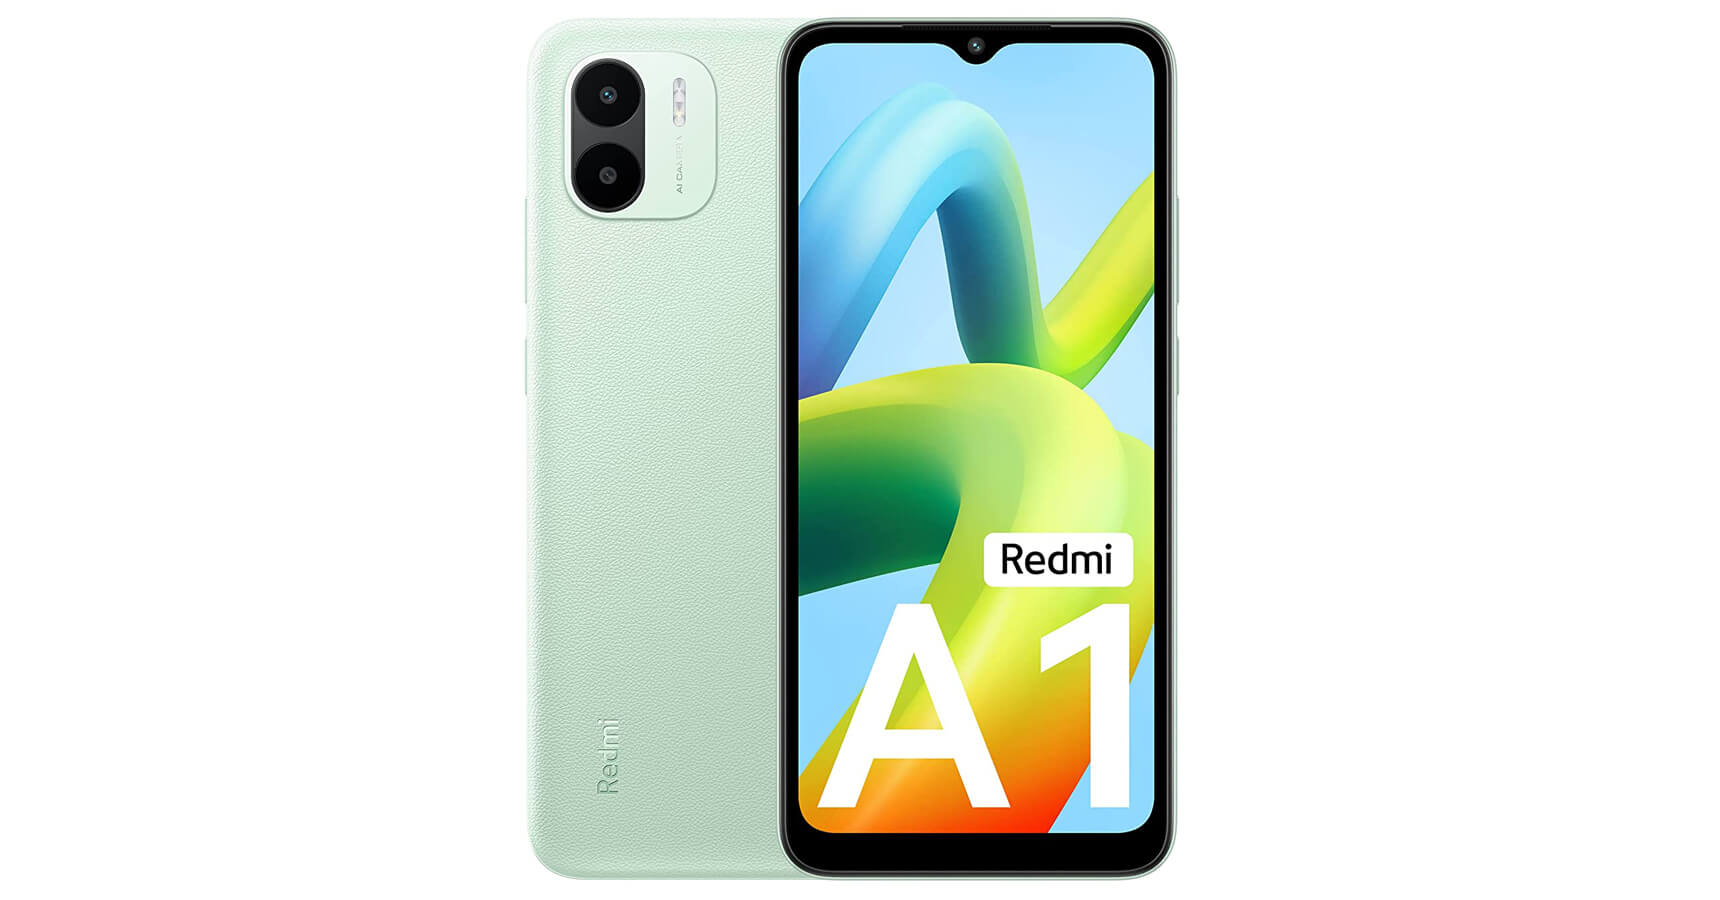 Amazon offer on Redmi A1